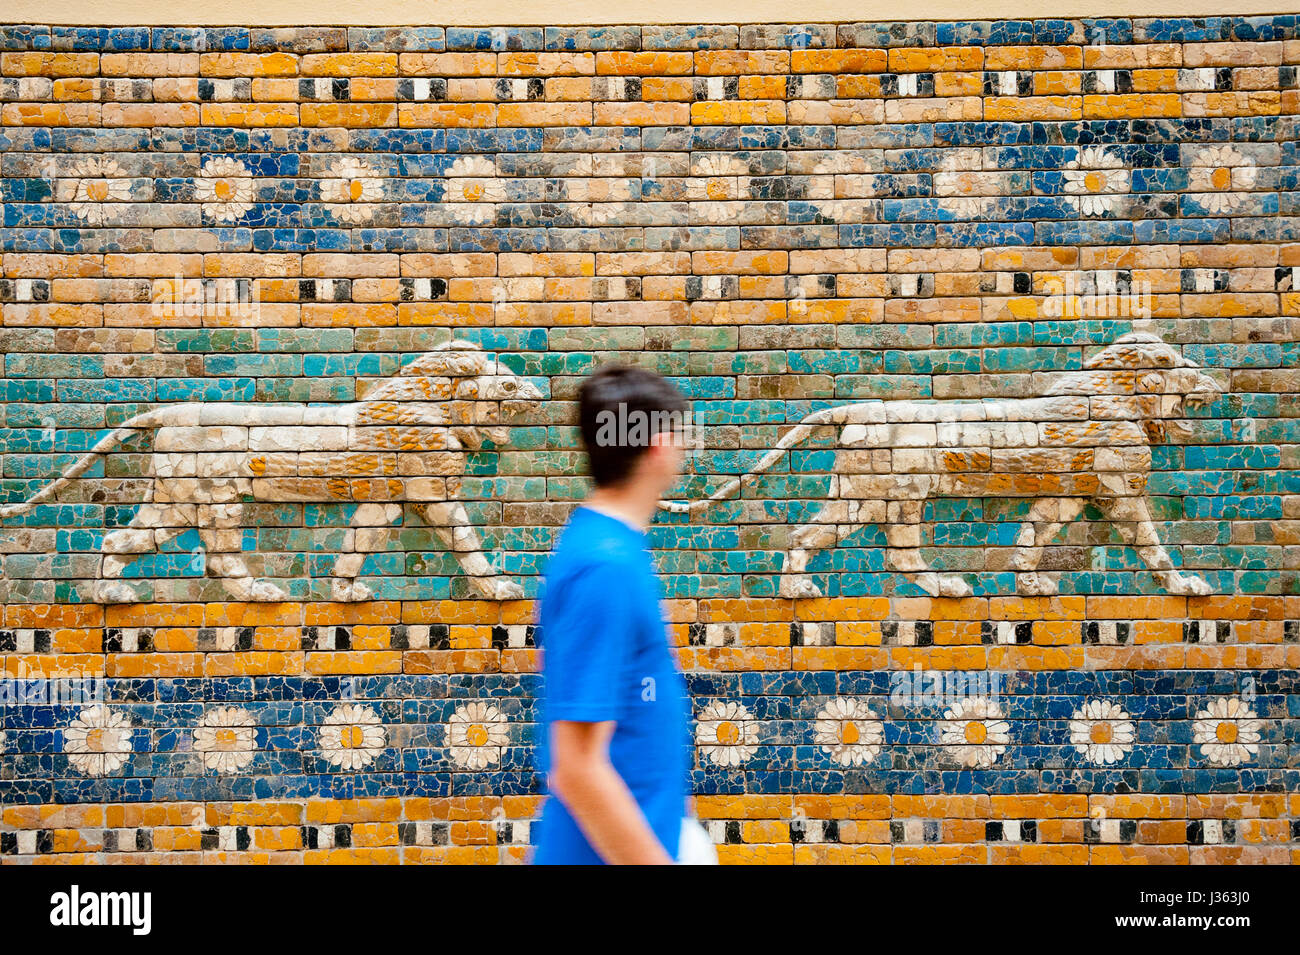 Ceramic tiles showing lions on Processional Way at Ishtar Gate in Pergamon Museum, Museumsinsel, Berlin, Germany Stock Photo